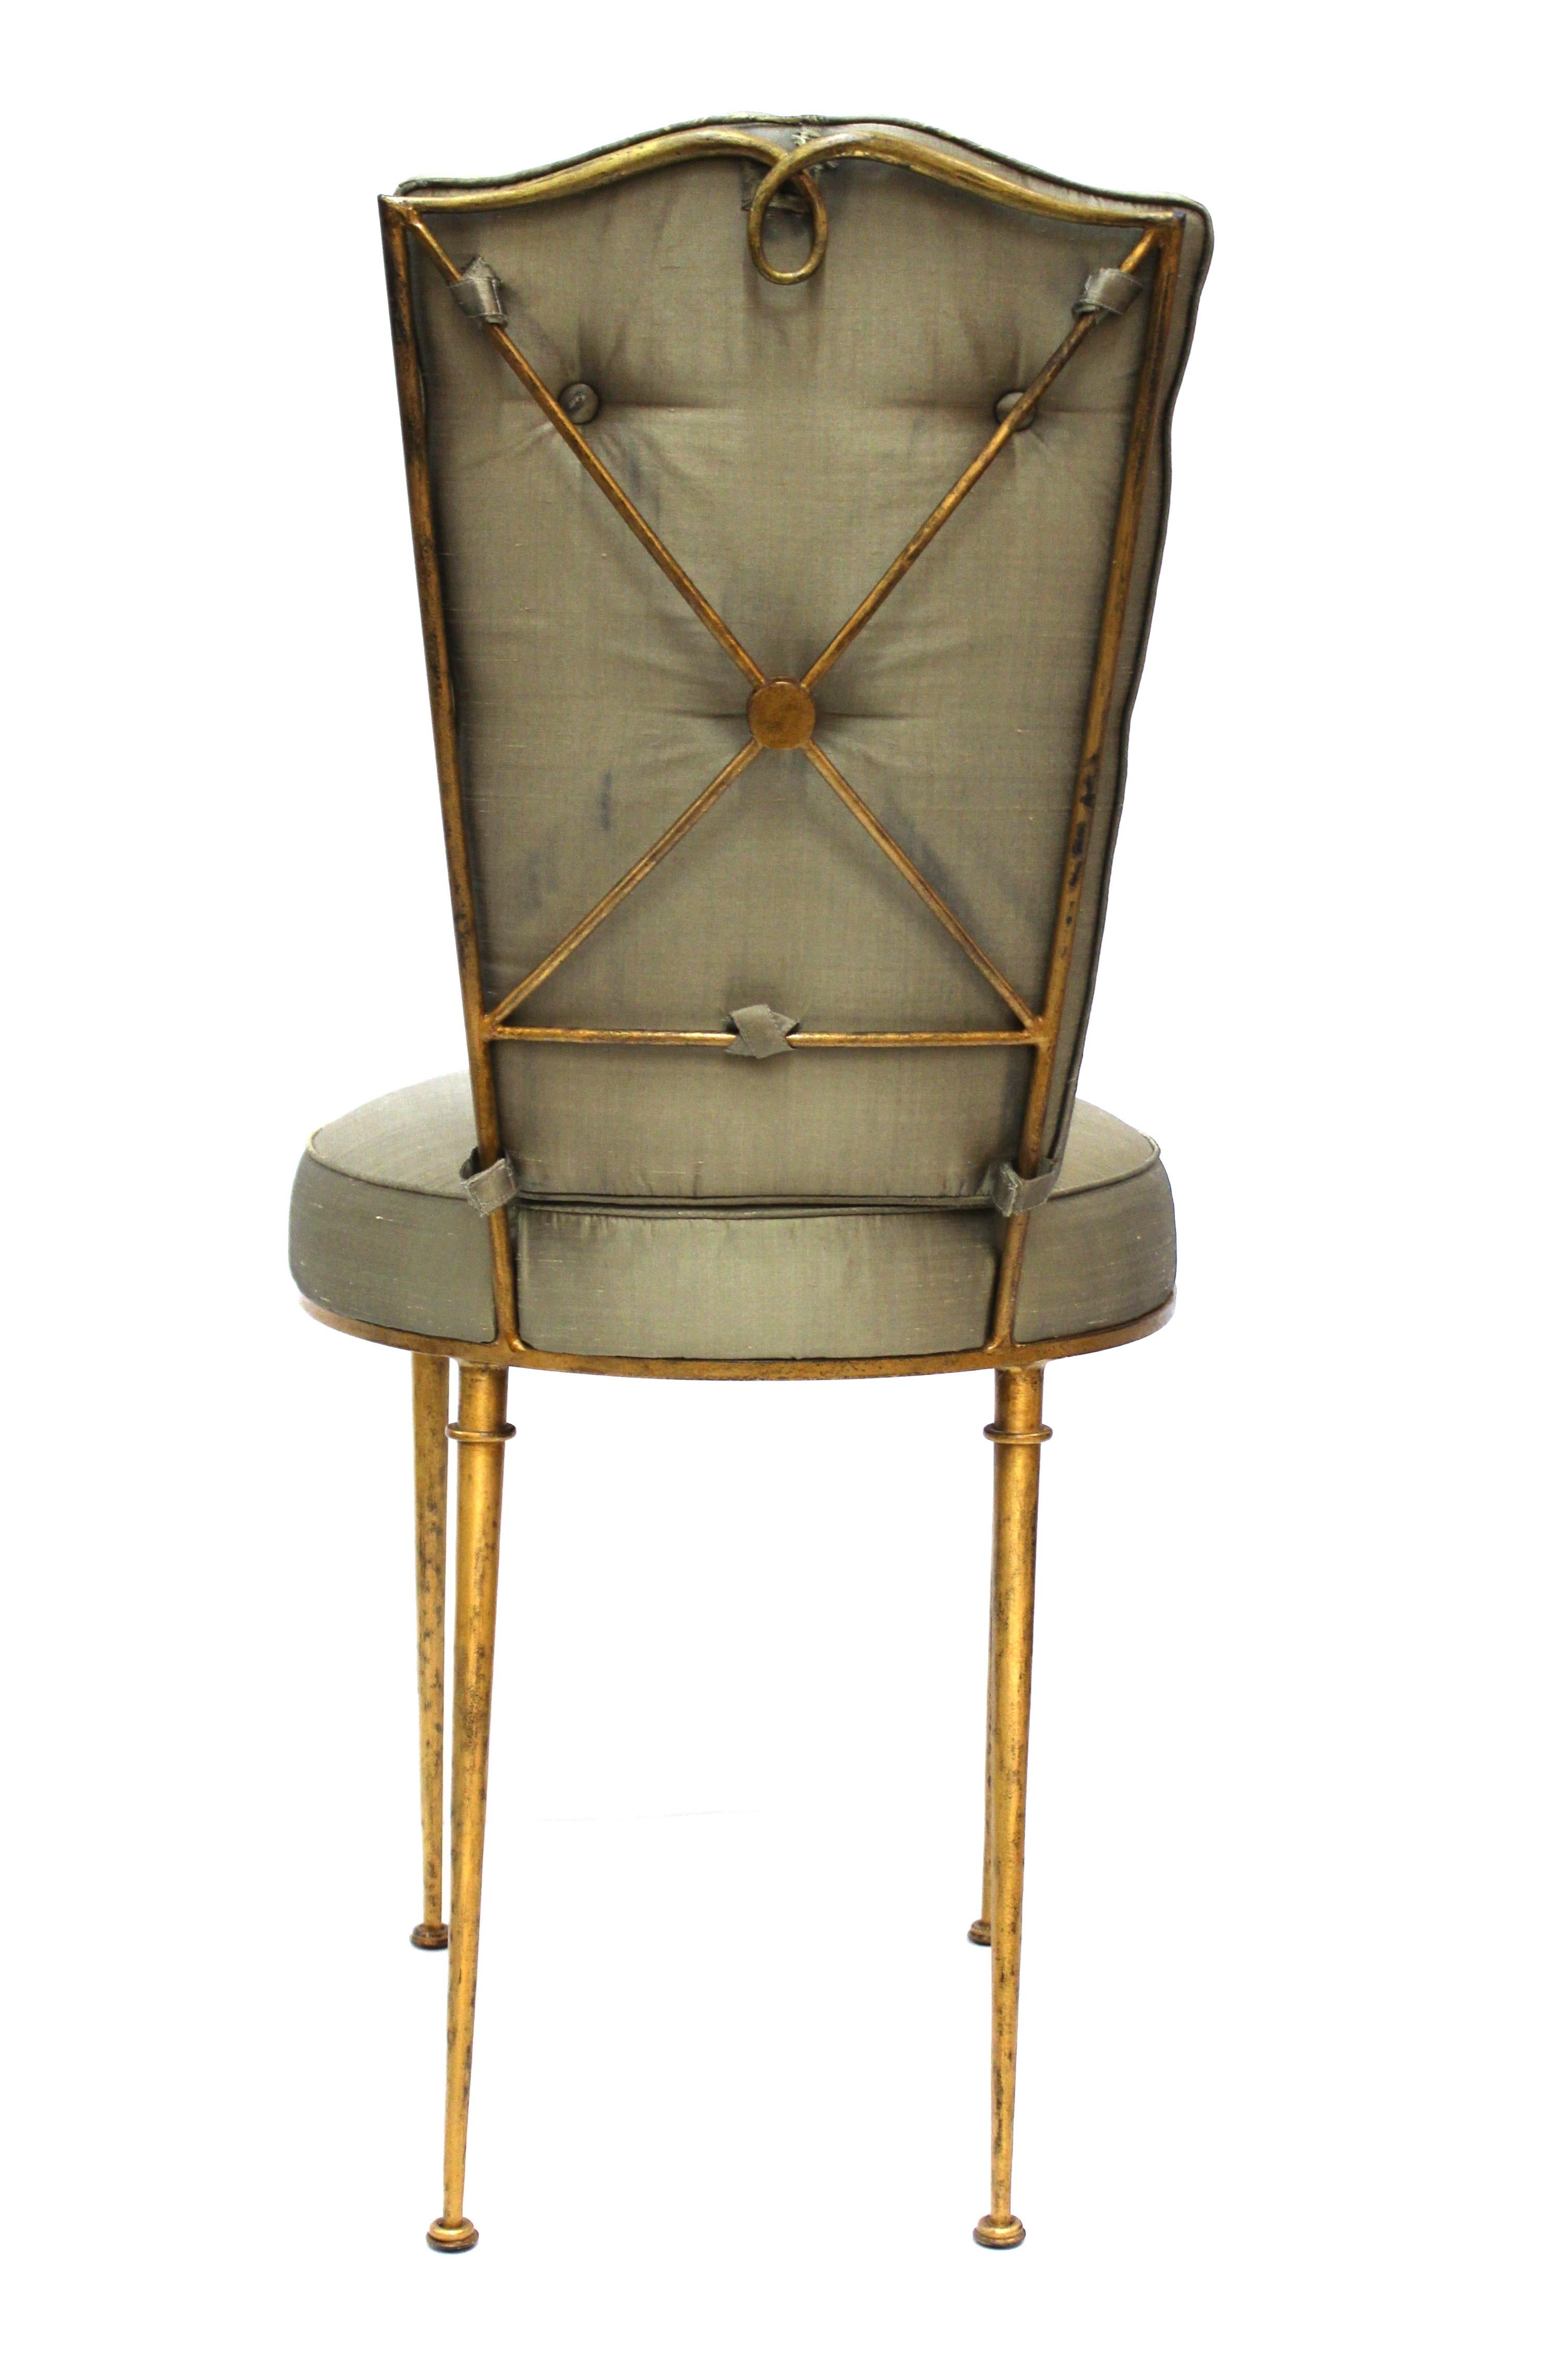 Upholstery Rene Prou French Mid-Century Modern Side Chair or Vanity Chair in Gilt Metal